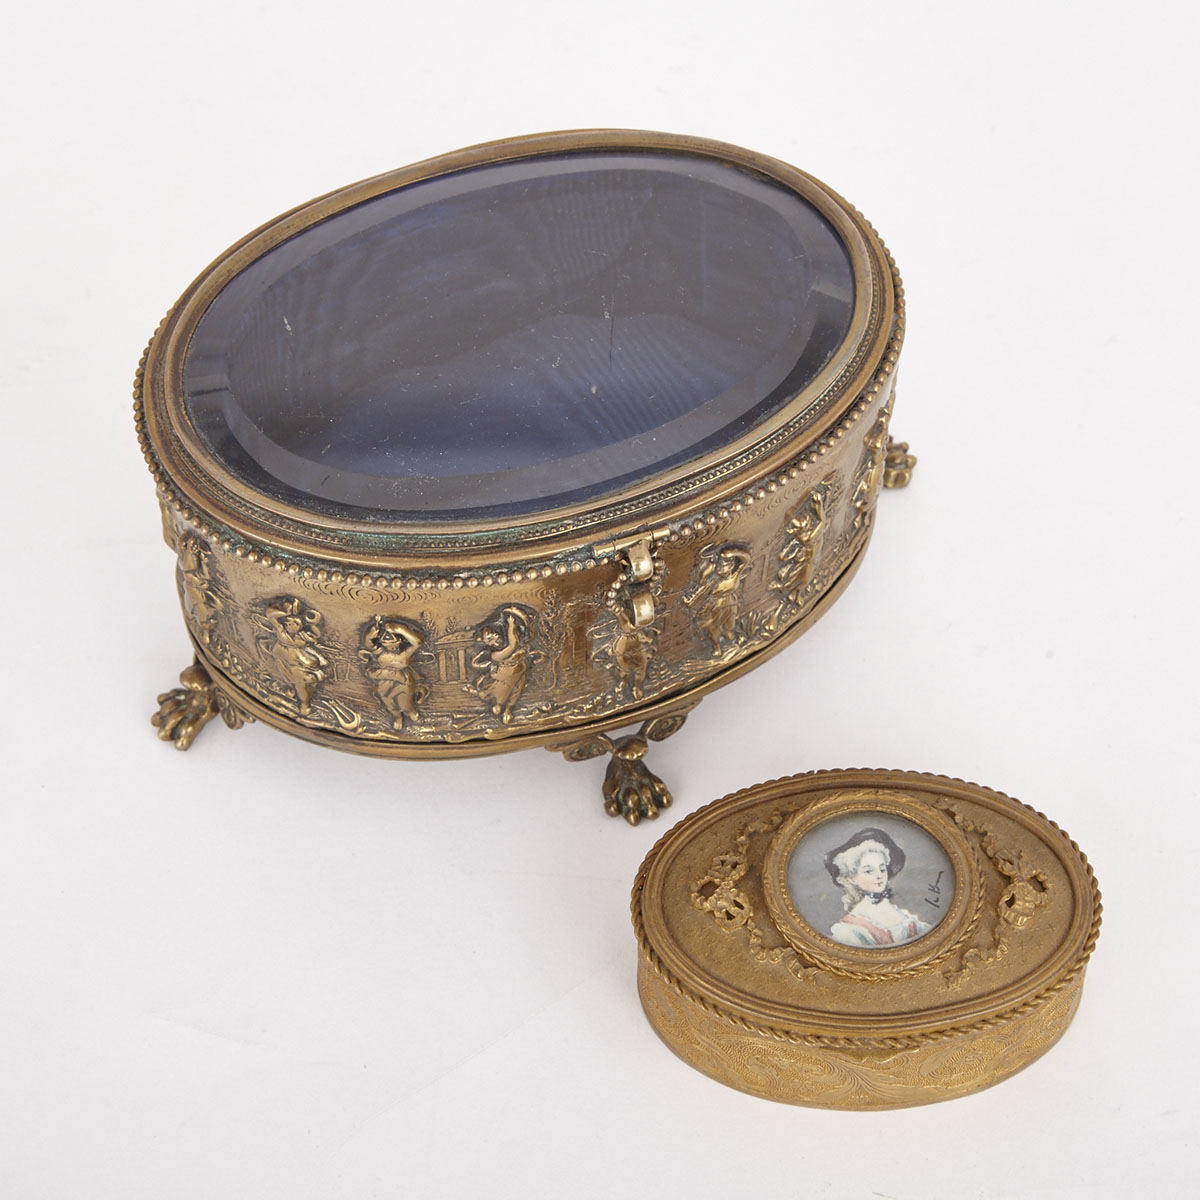 Two French Gilt Bronze Dresser Boxes, 19th/early 20th century